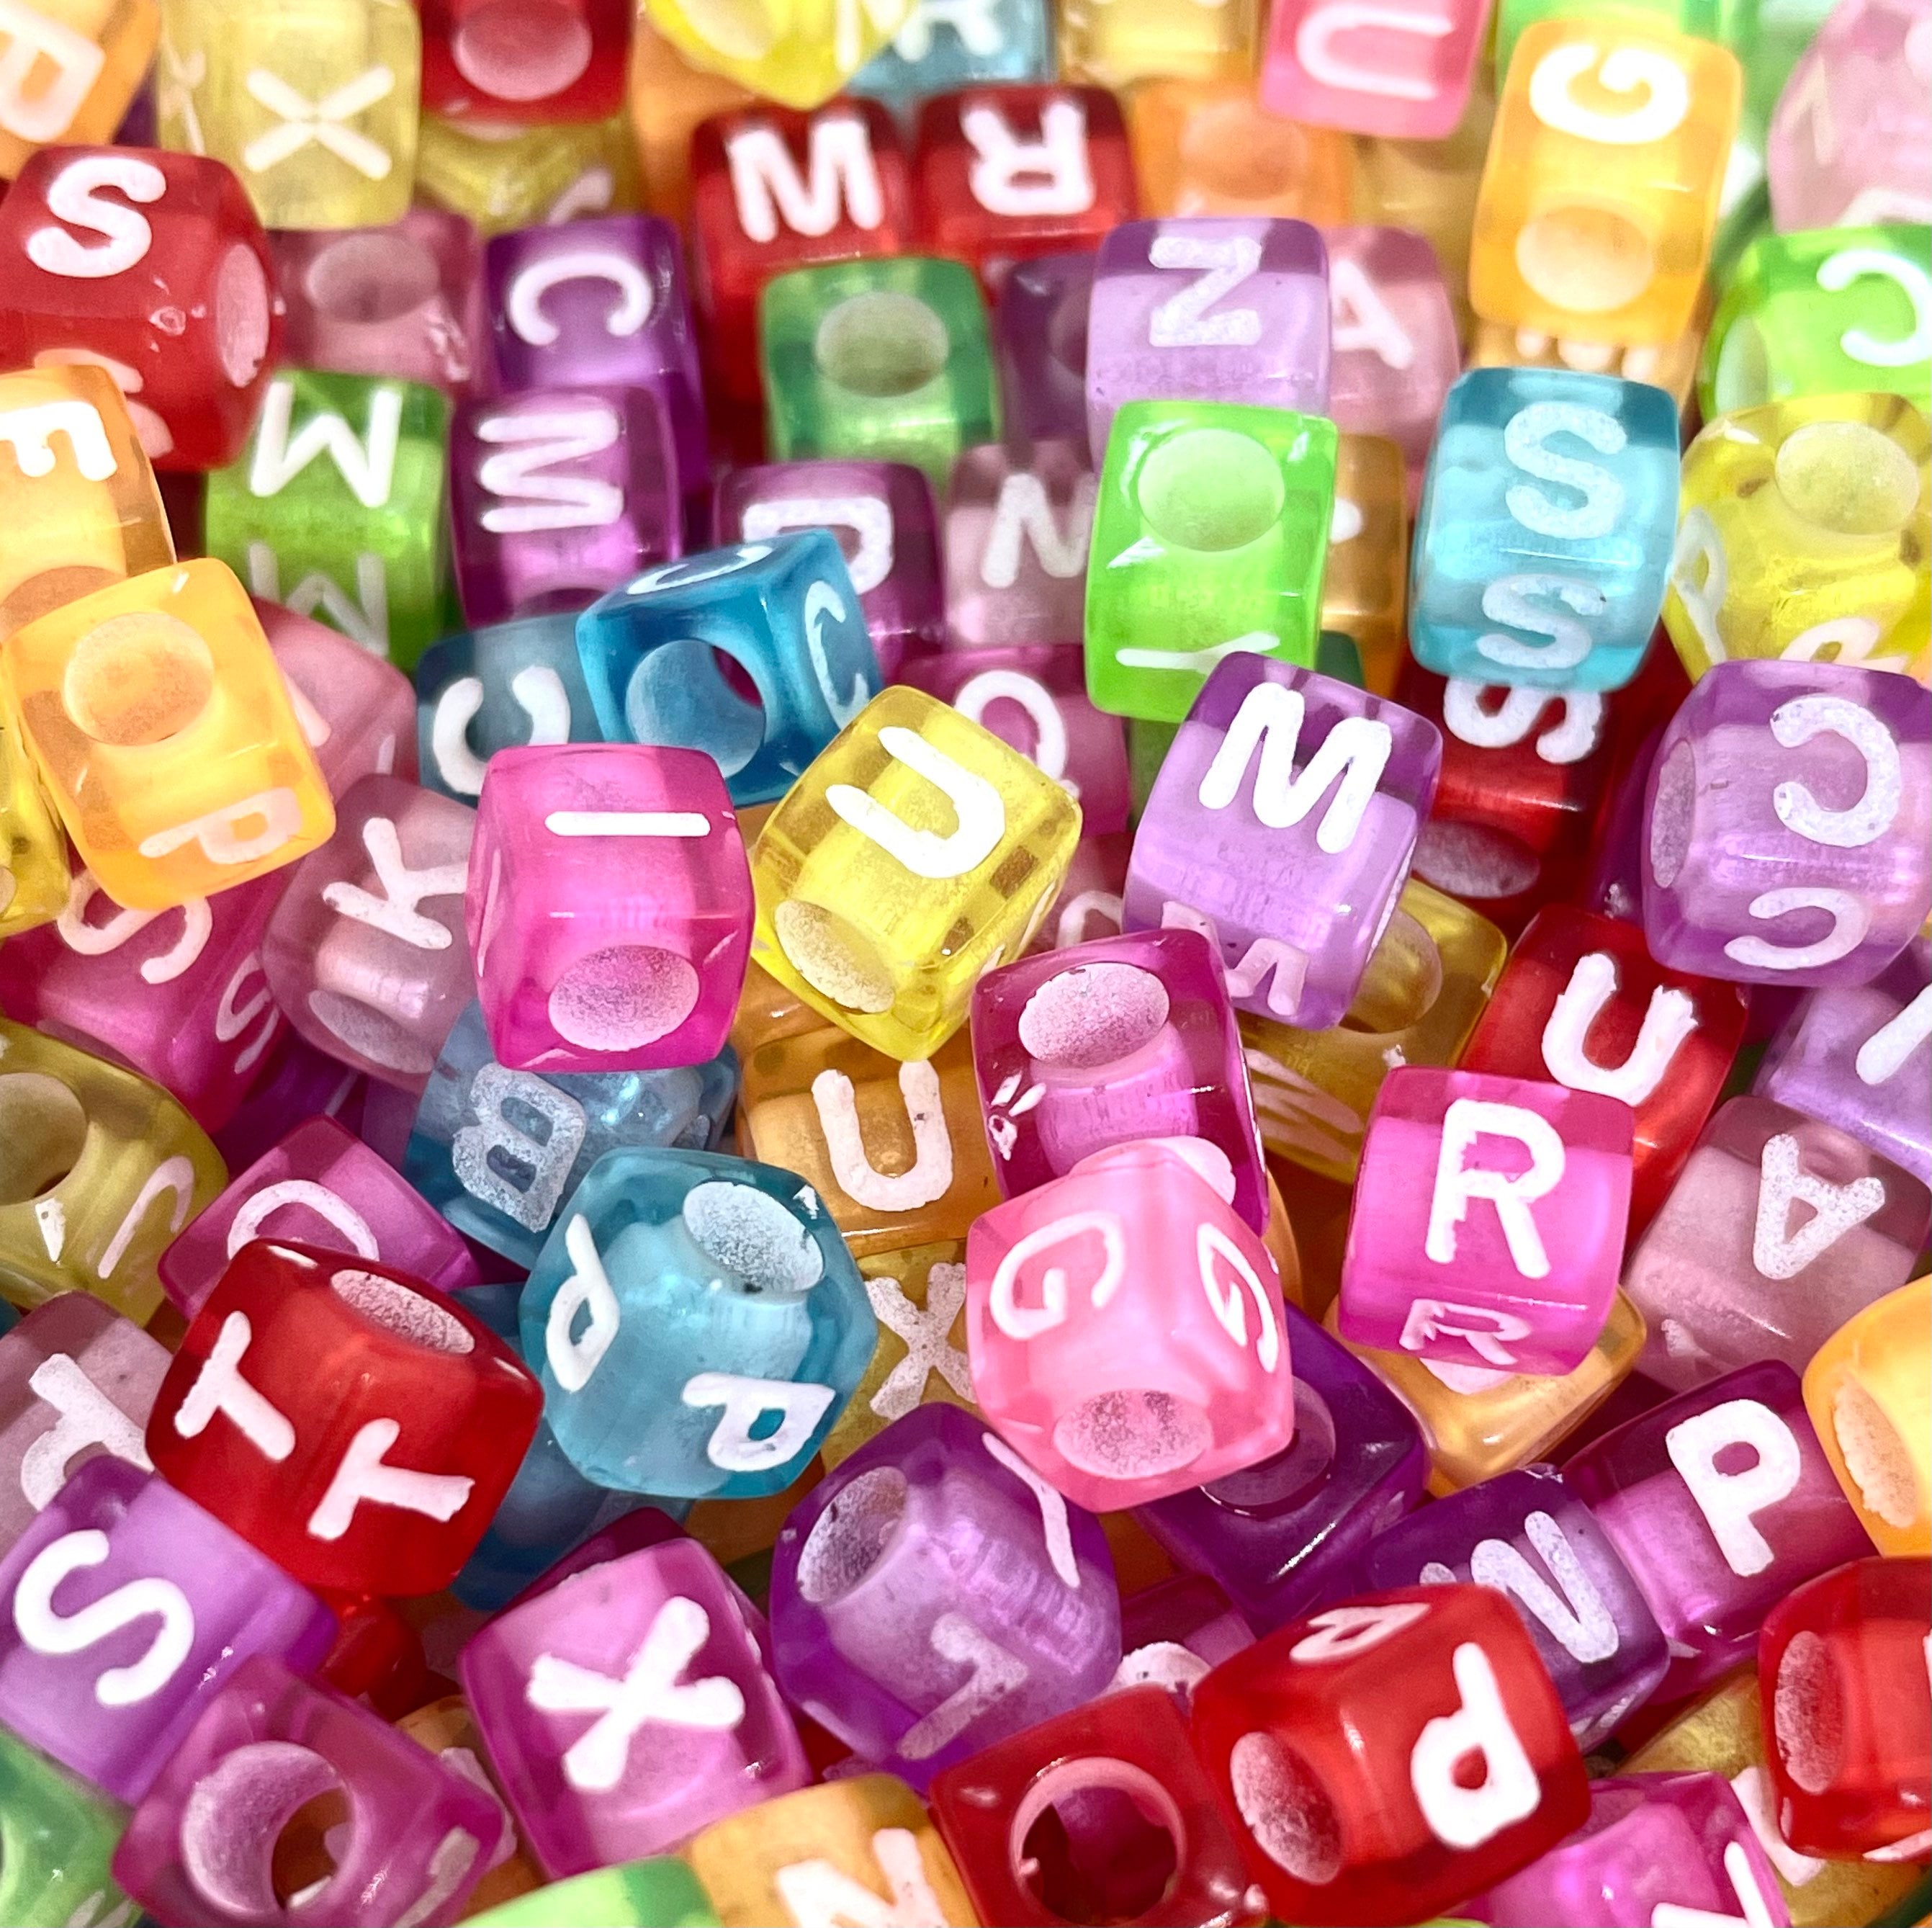 Magenta Pink Letter Beads, Magenta Beads, Alphabet Beads for Name Jewelry,  Word Beads, Translucent Pink Jewelry -  Norway